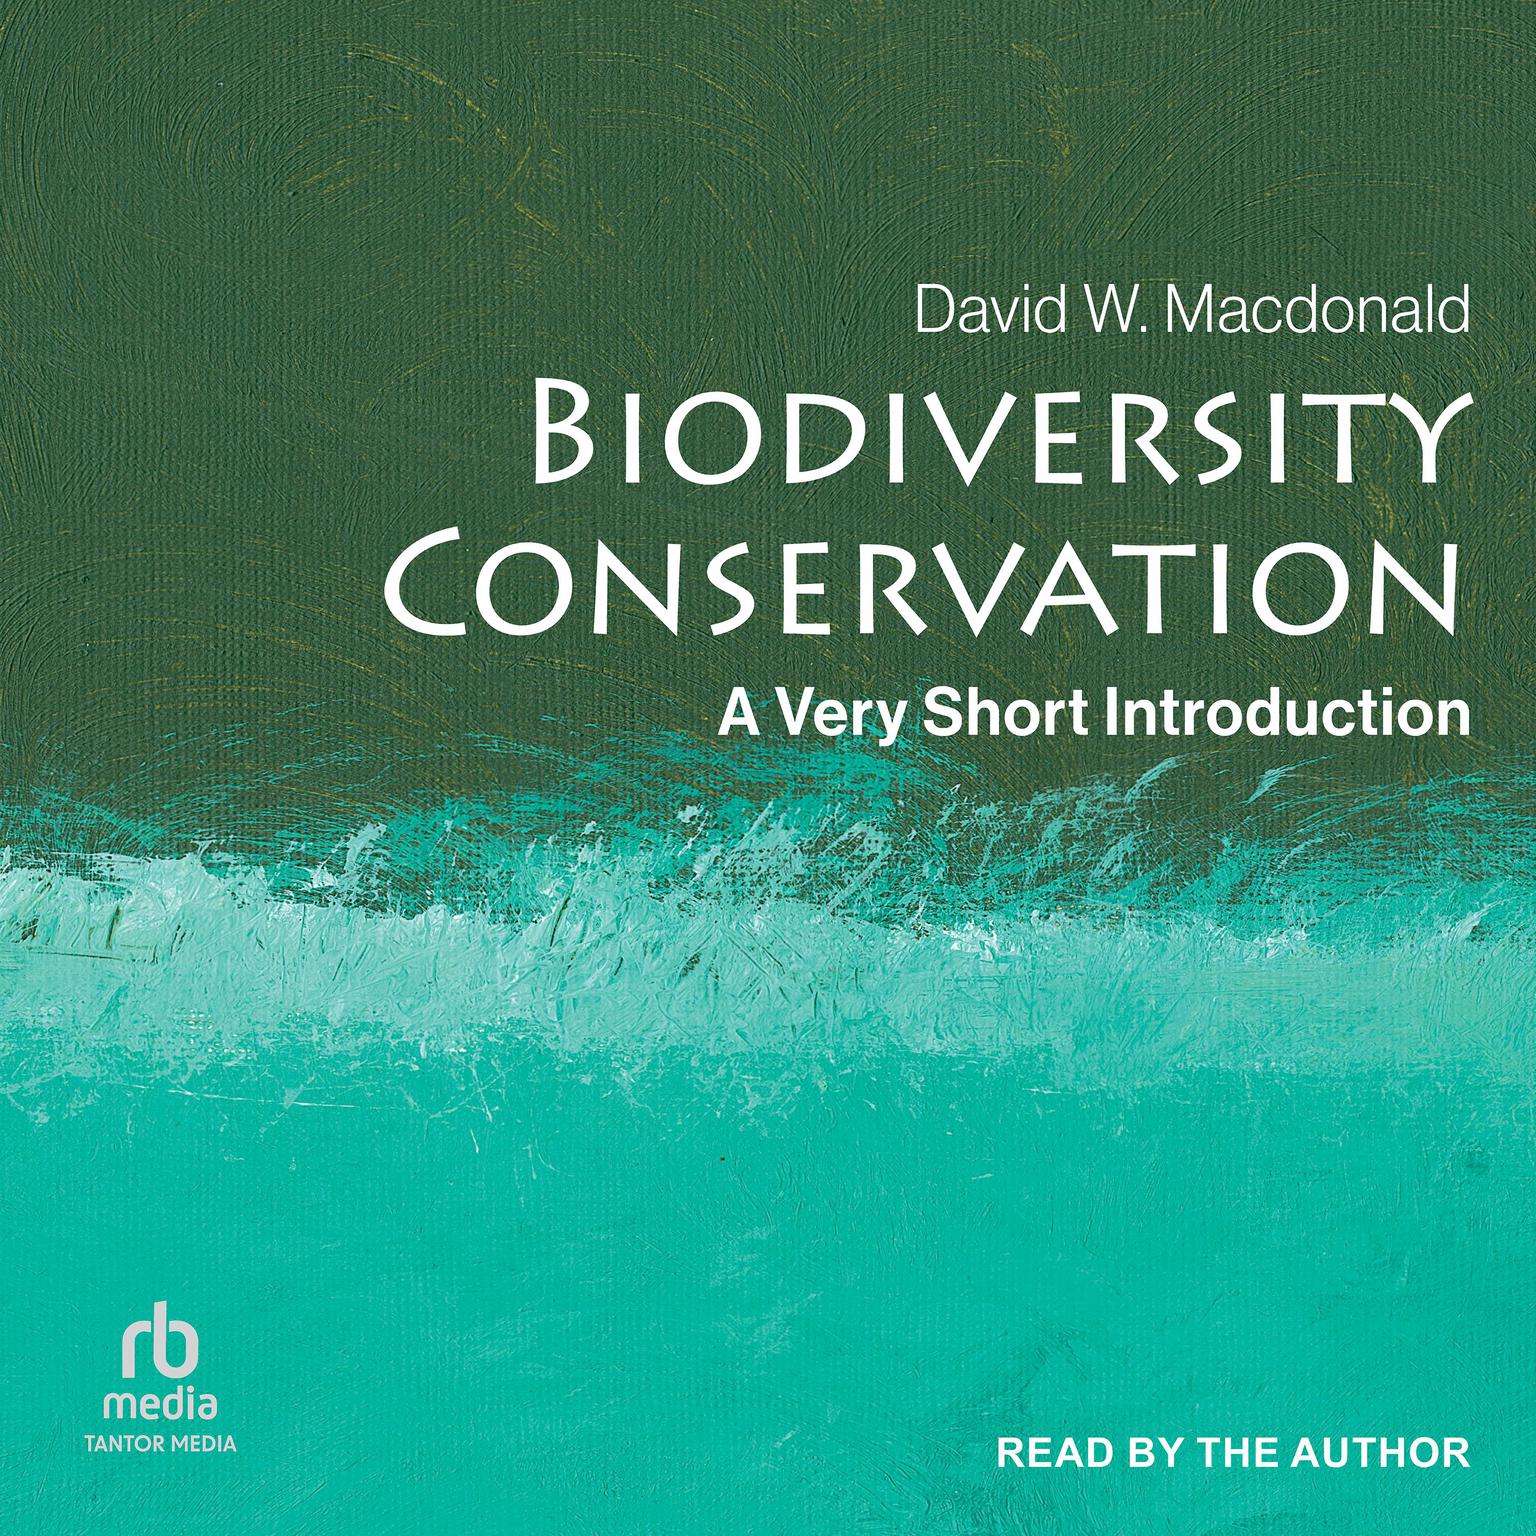 Biodiversity Conservation: A Very Short Introduction Audiobook, by David W. Macdonald